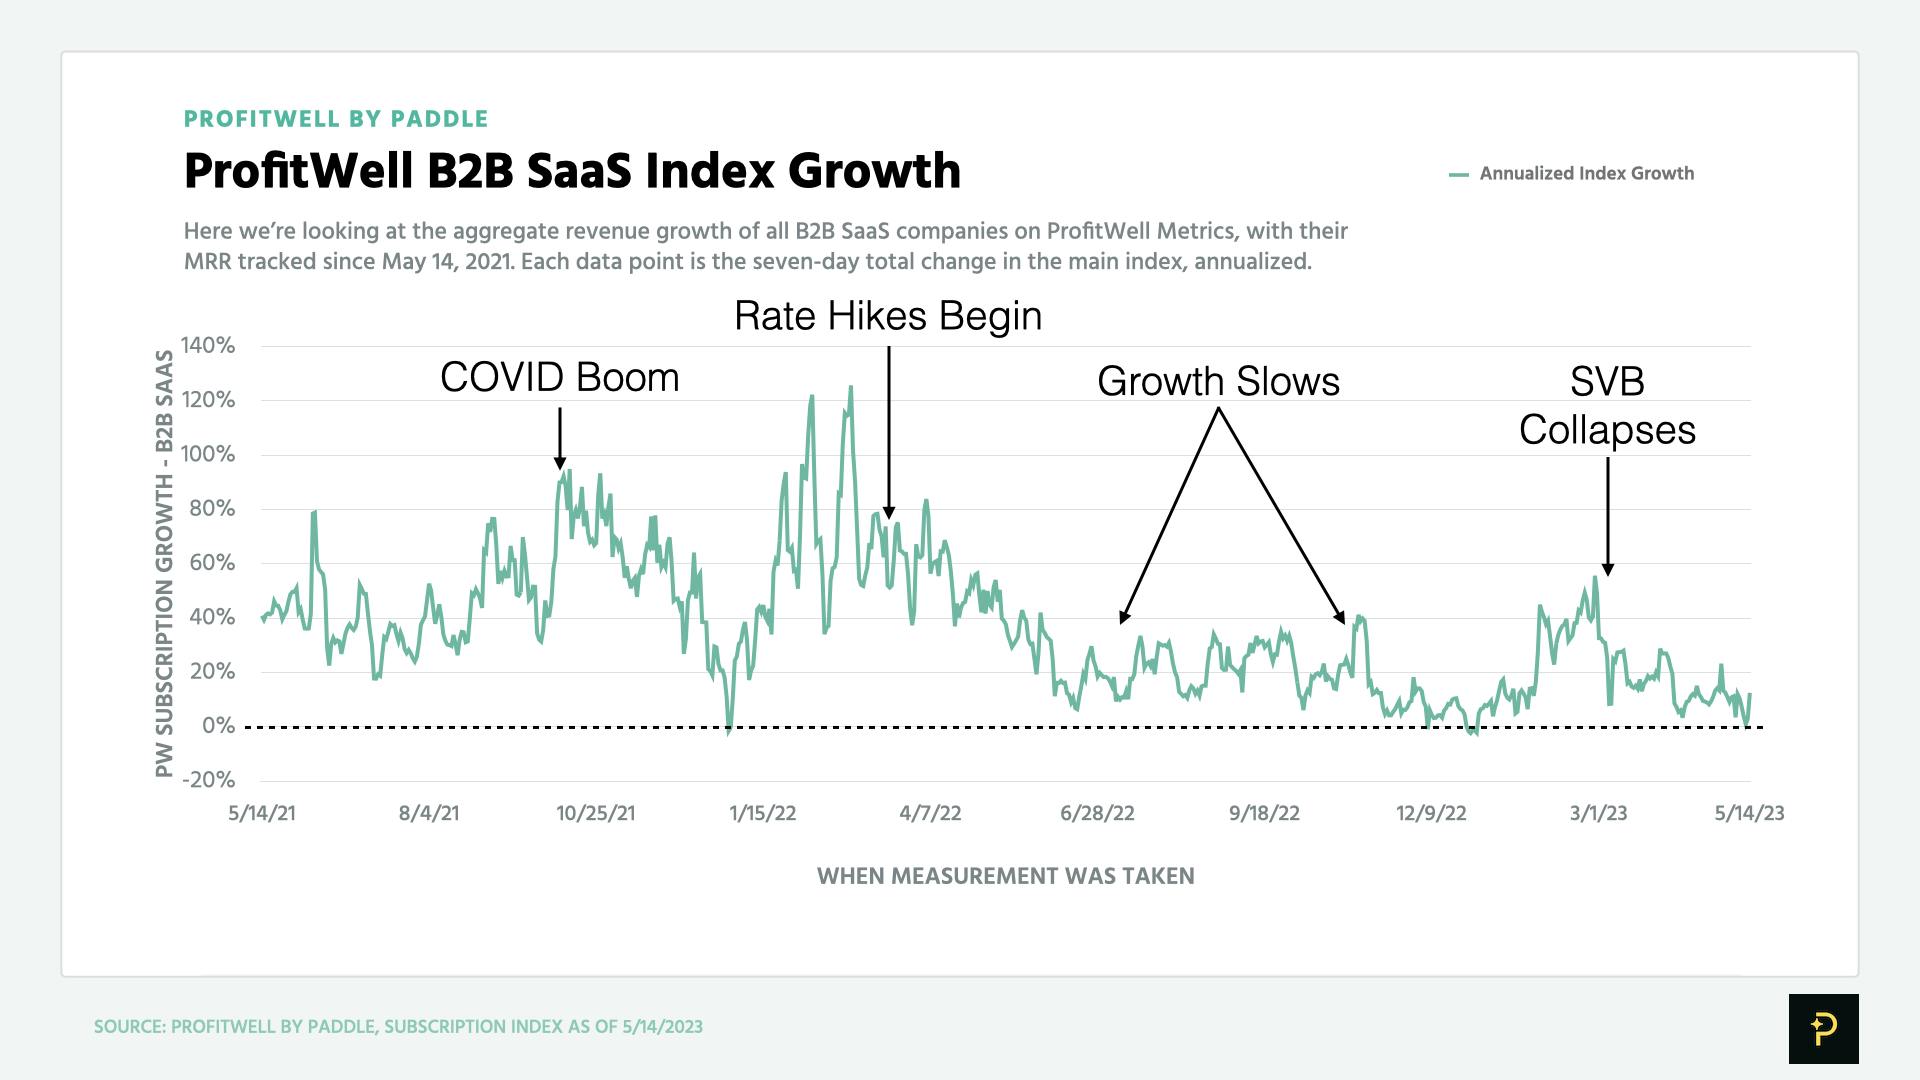 May 2023 chart of the ProfitWell B2B SaaS Index's growth, showing an annualized growth rate dropping to between 0-20%.